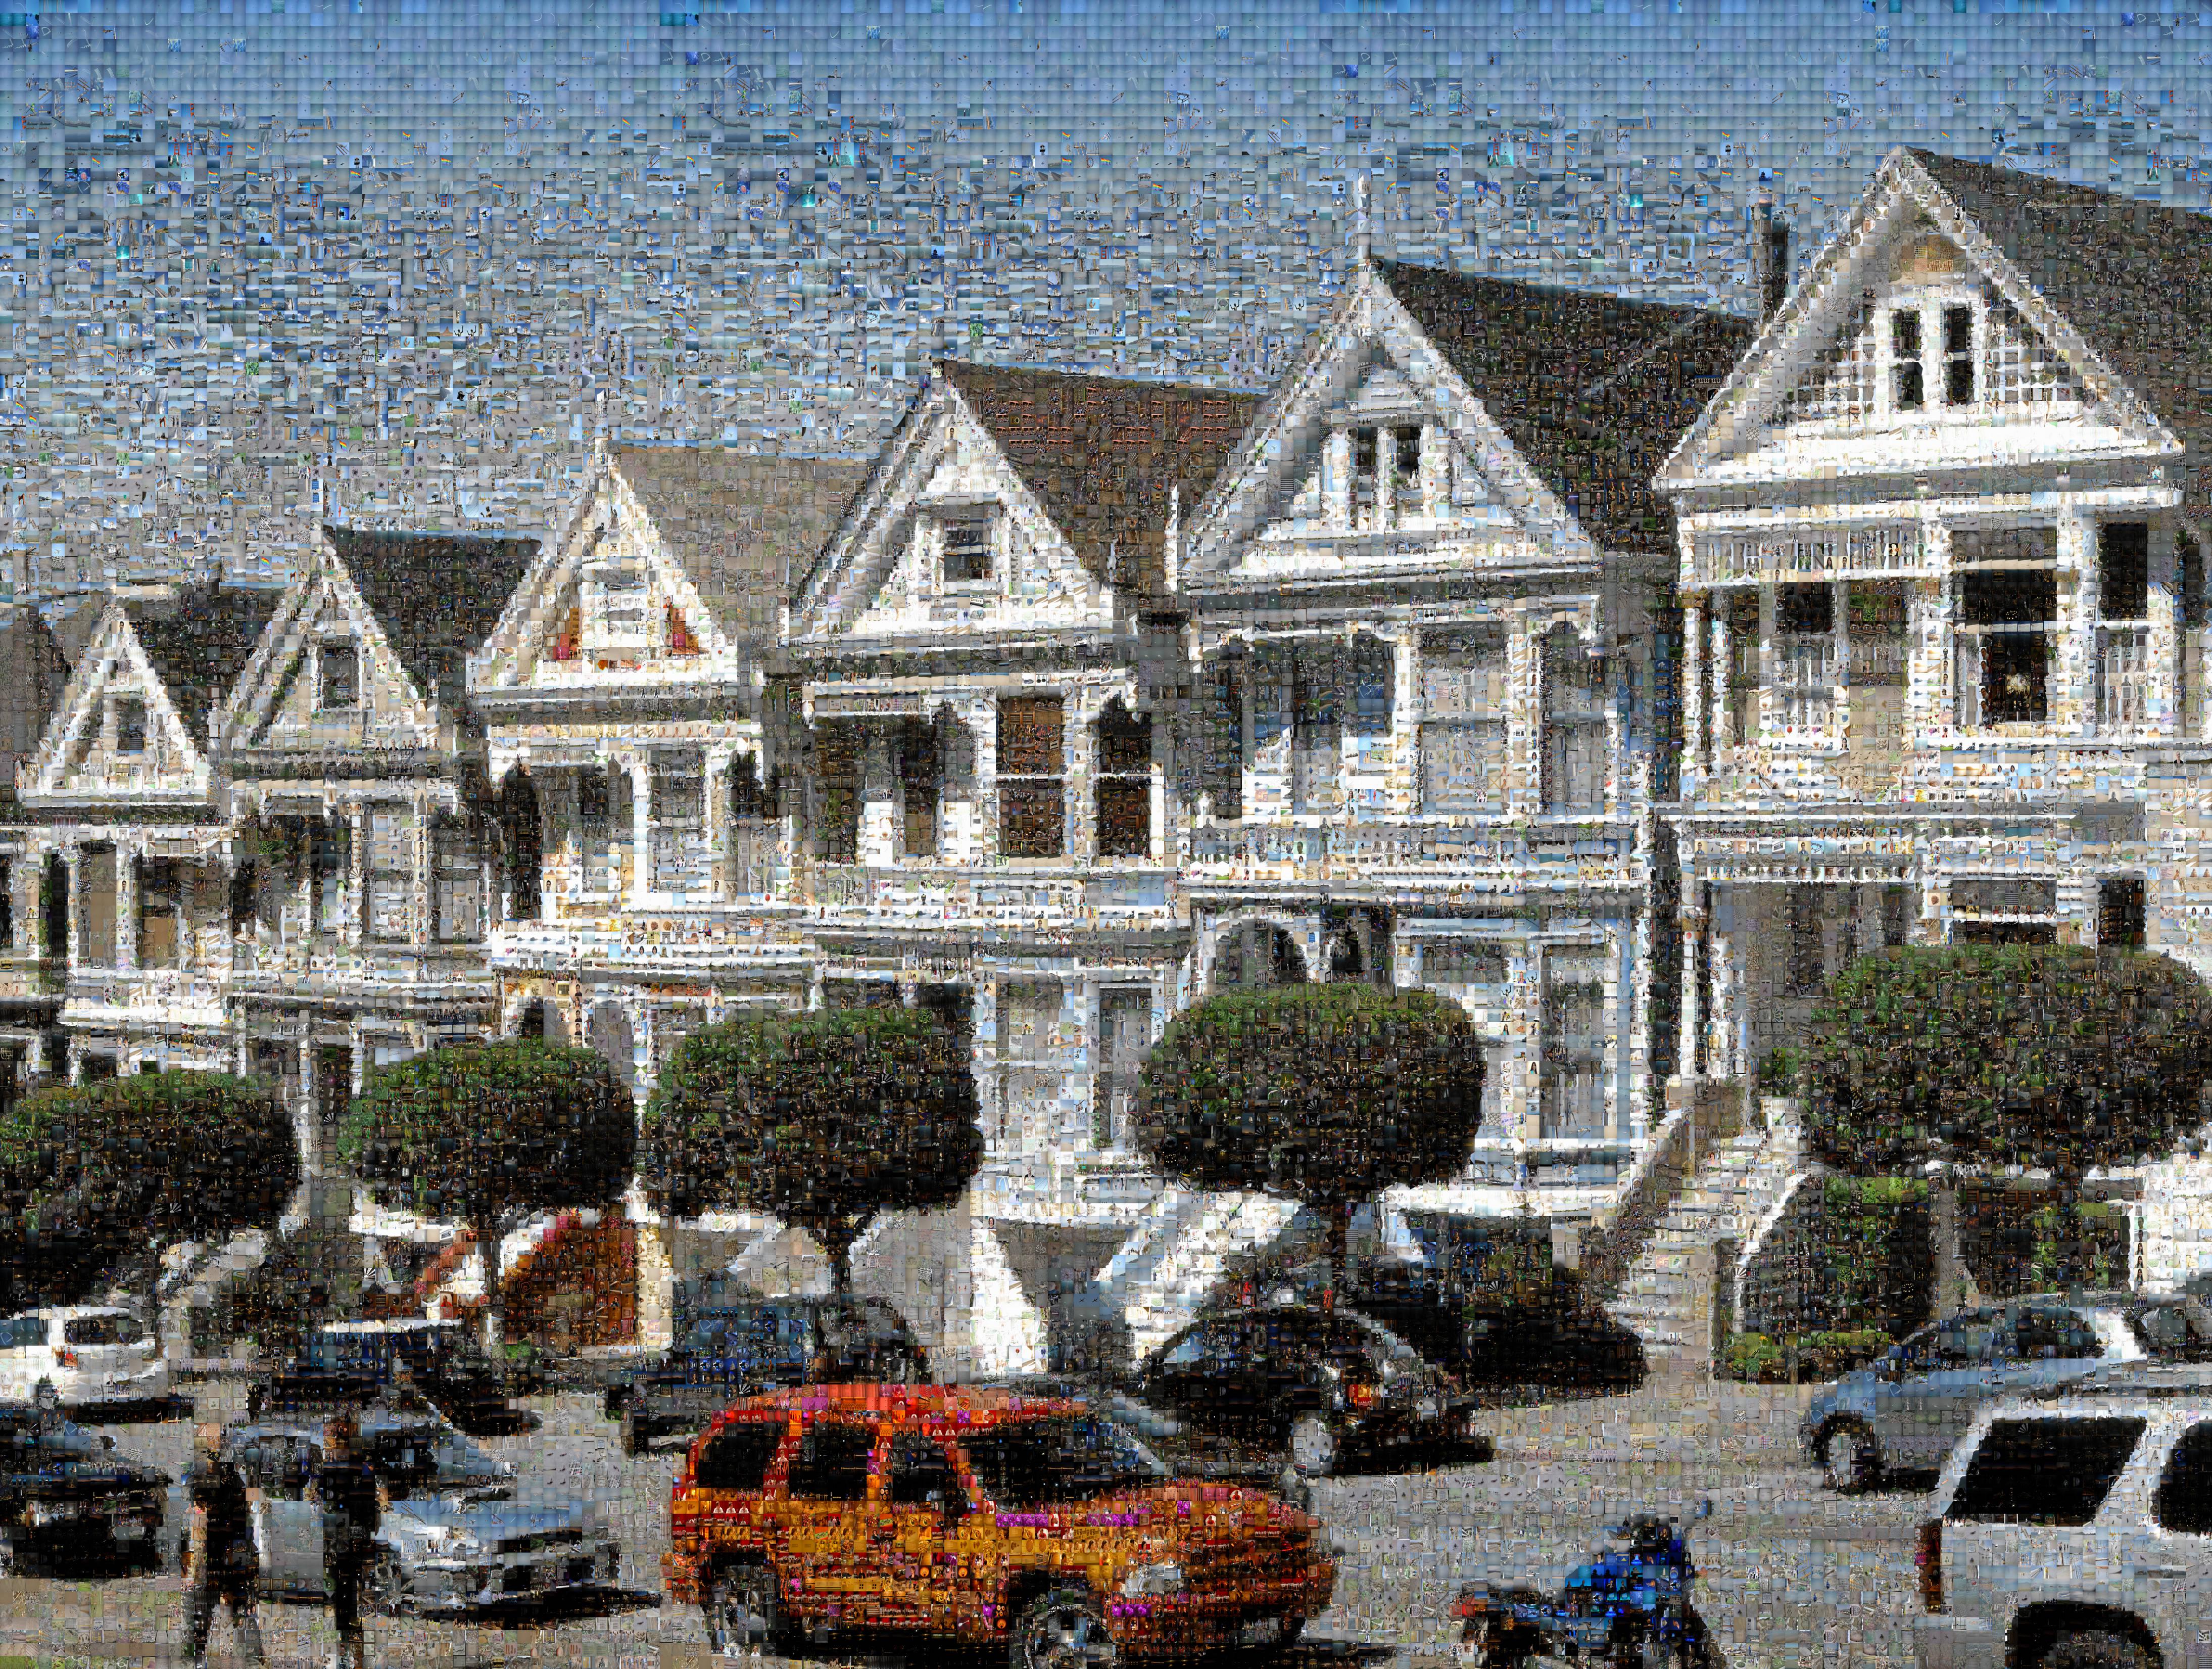 Photomosaic of a photograph of the Painted Ladies